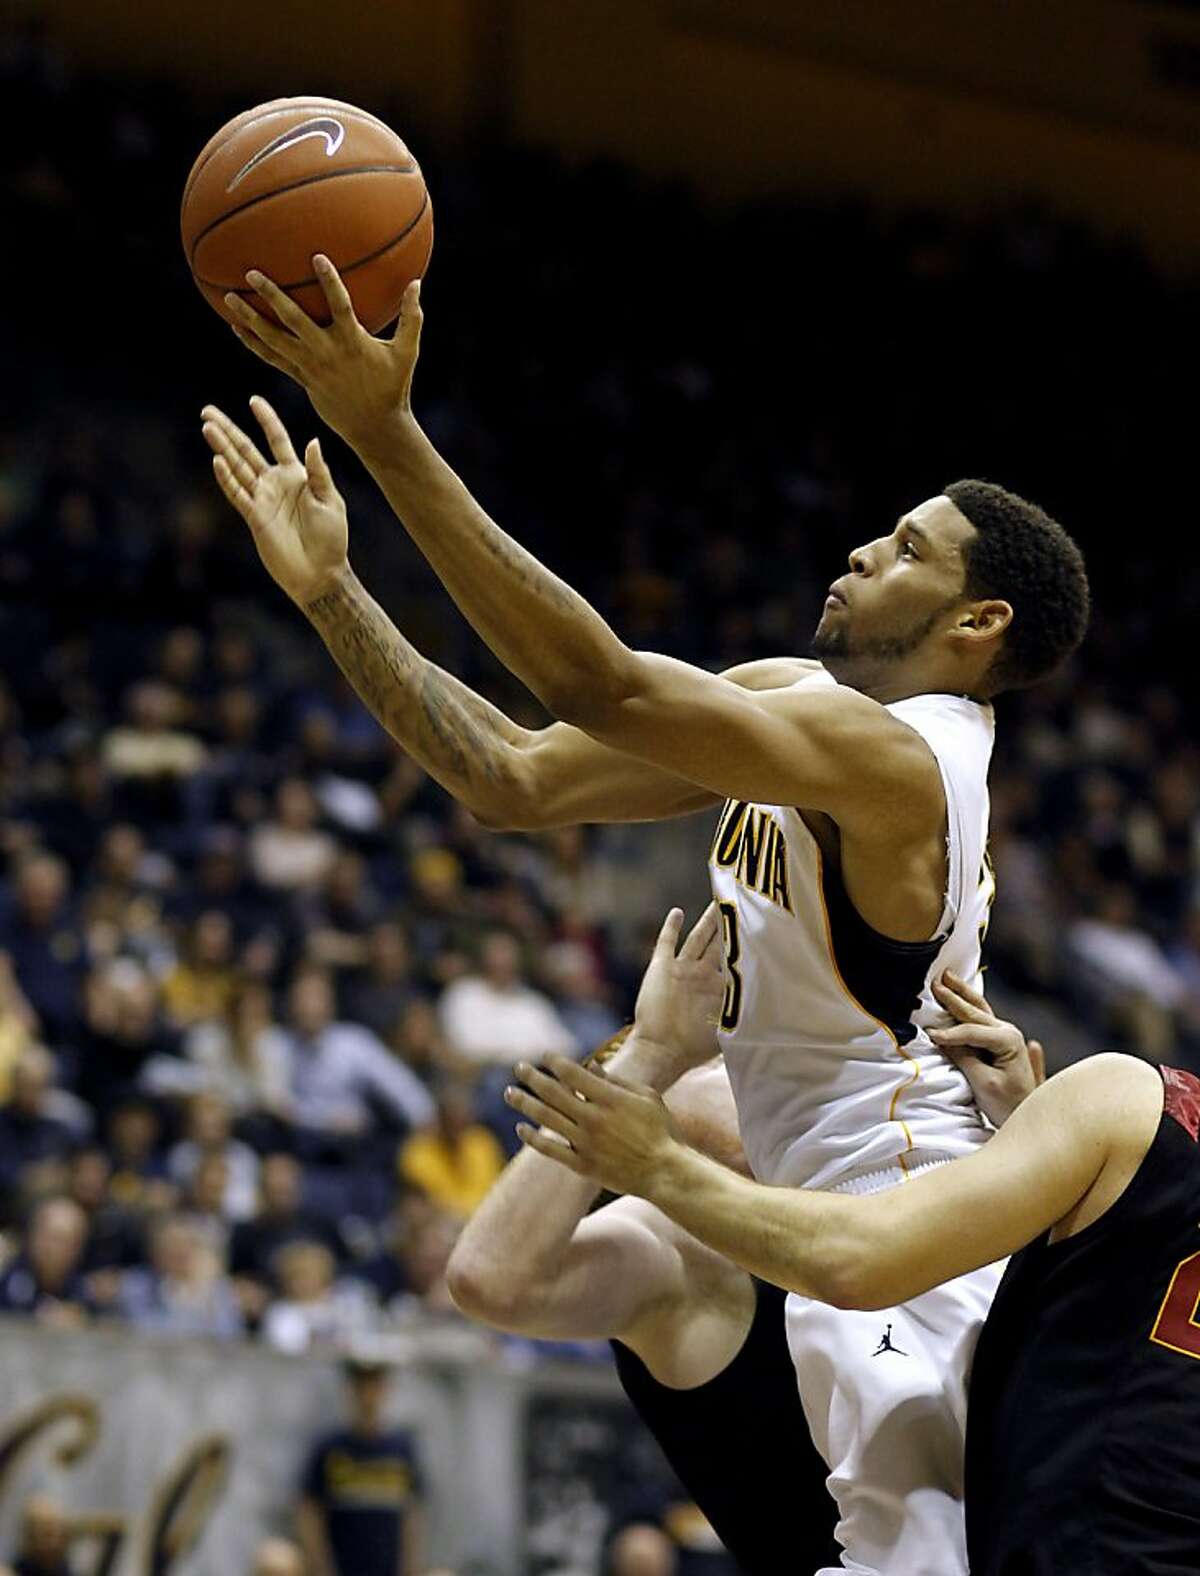 Cal's Allen Crabbe, (23) drives to the basket during the second half, as the California Golden Bears go on to beat the USC Trojans 53-49, at Haas Pavilion on the UC Berkeley campus on Thursday December 29, 2011 in Berkeley, Ca.